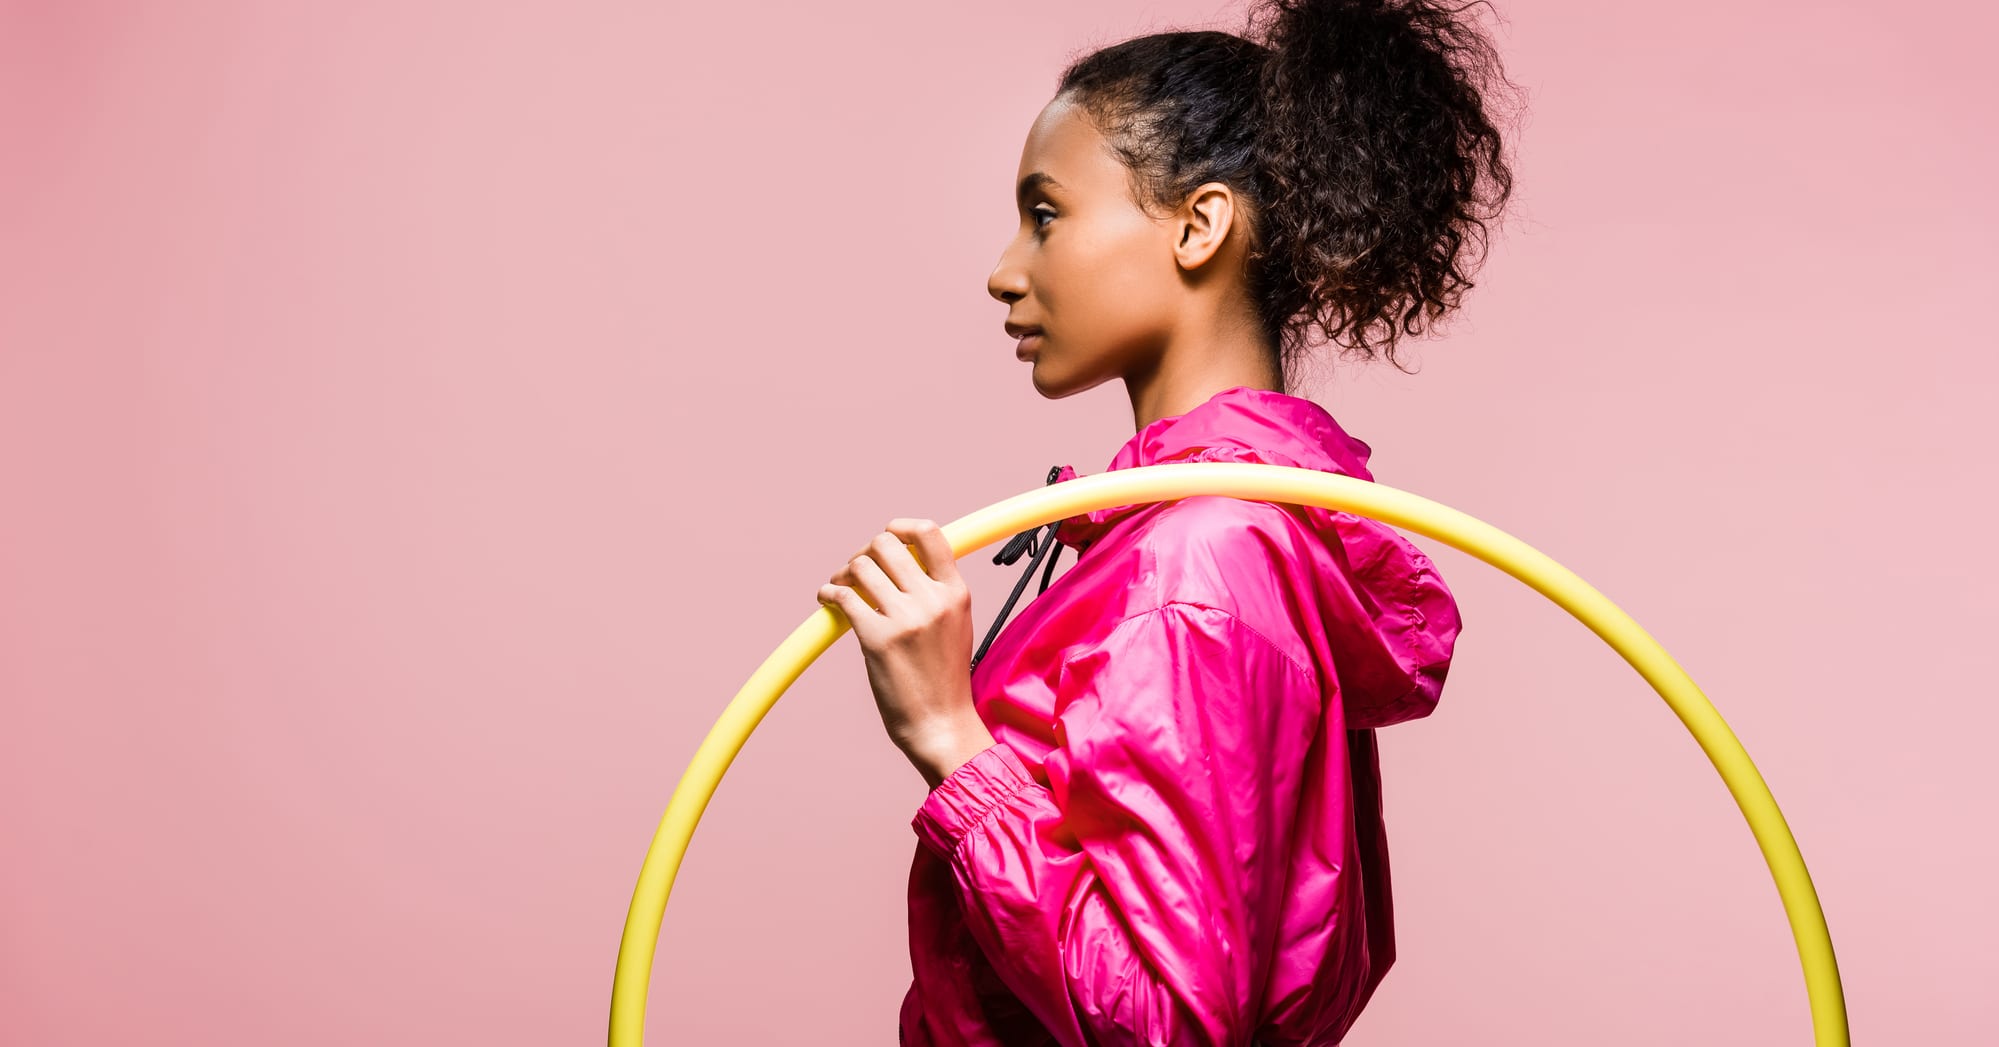 Side view of a woman in a pink jacket holding a yellow weighted hula hoop on her shoulder.